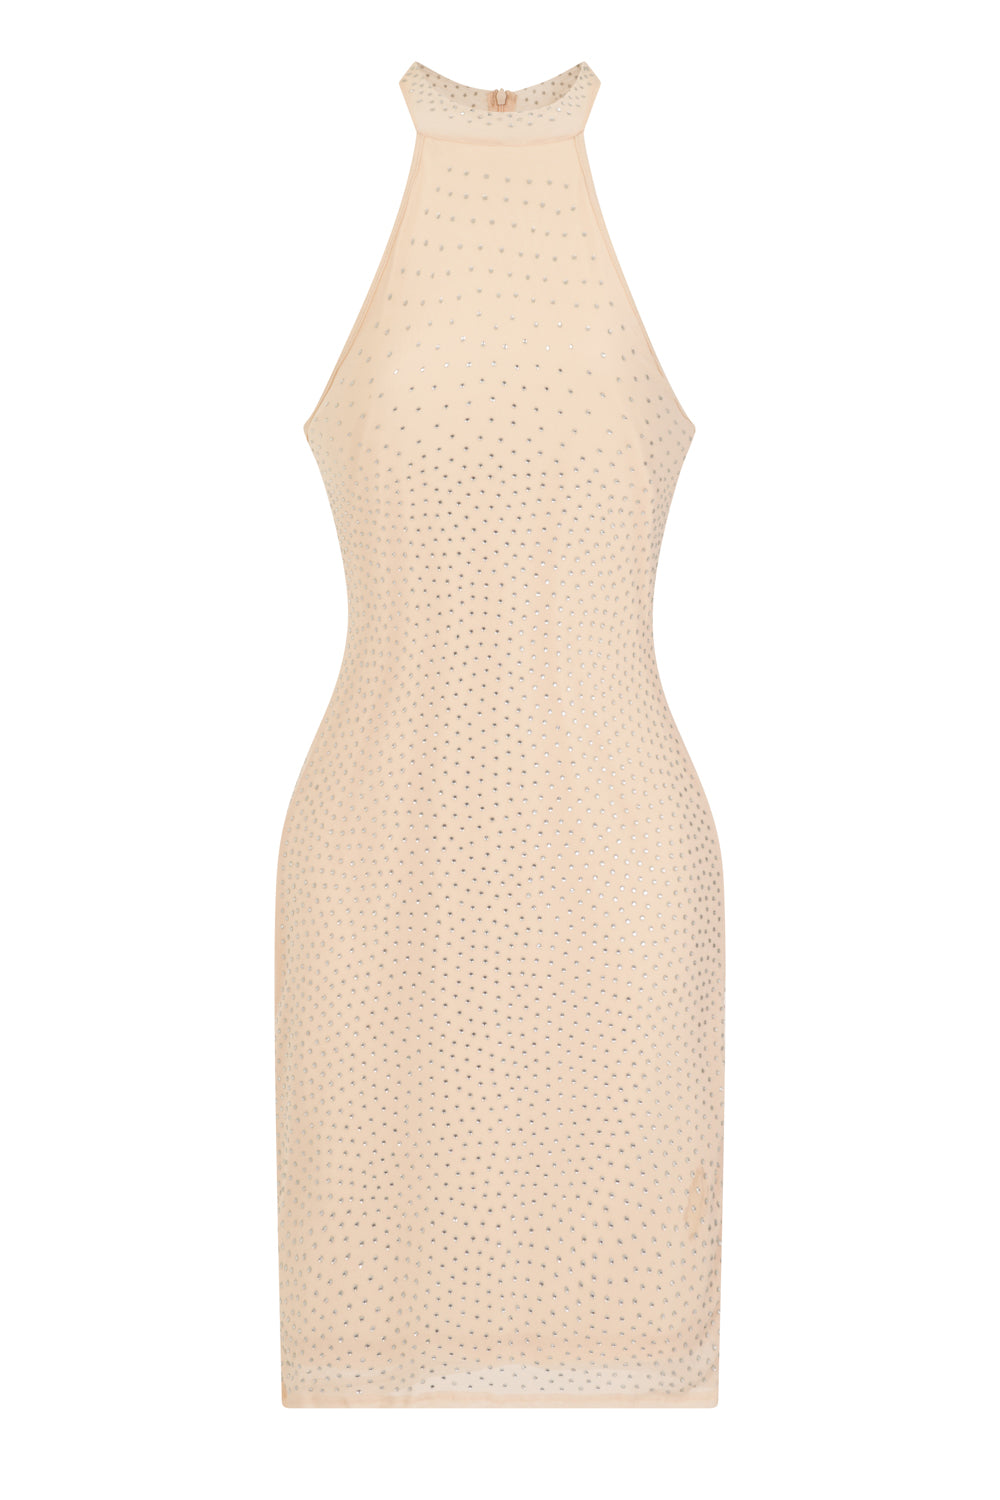 Glow Up Luxe Nude Rhinestone Bling High Neck Bodycon Mesh Dress